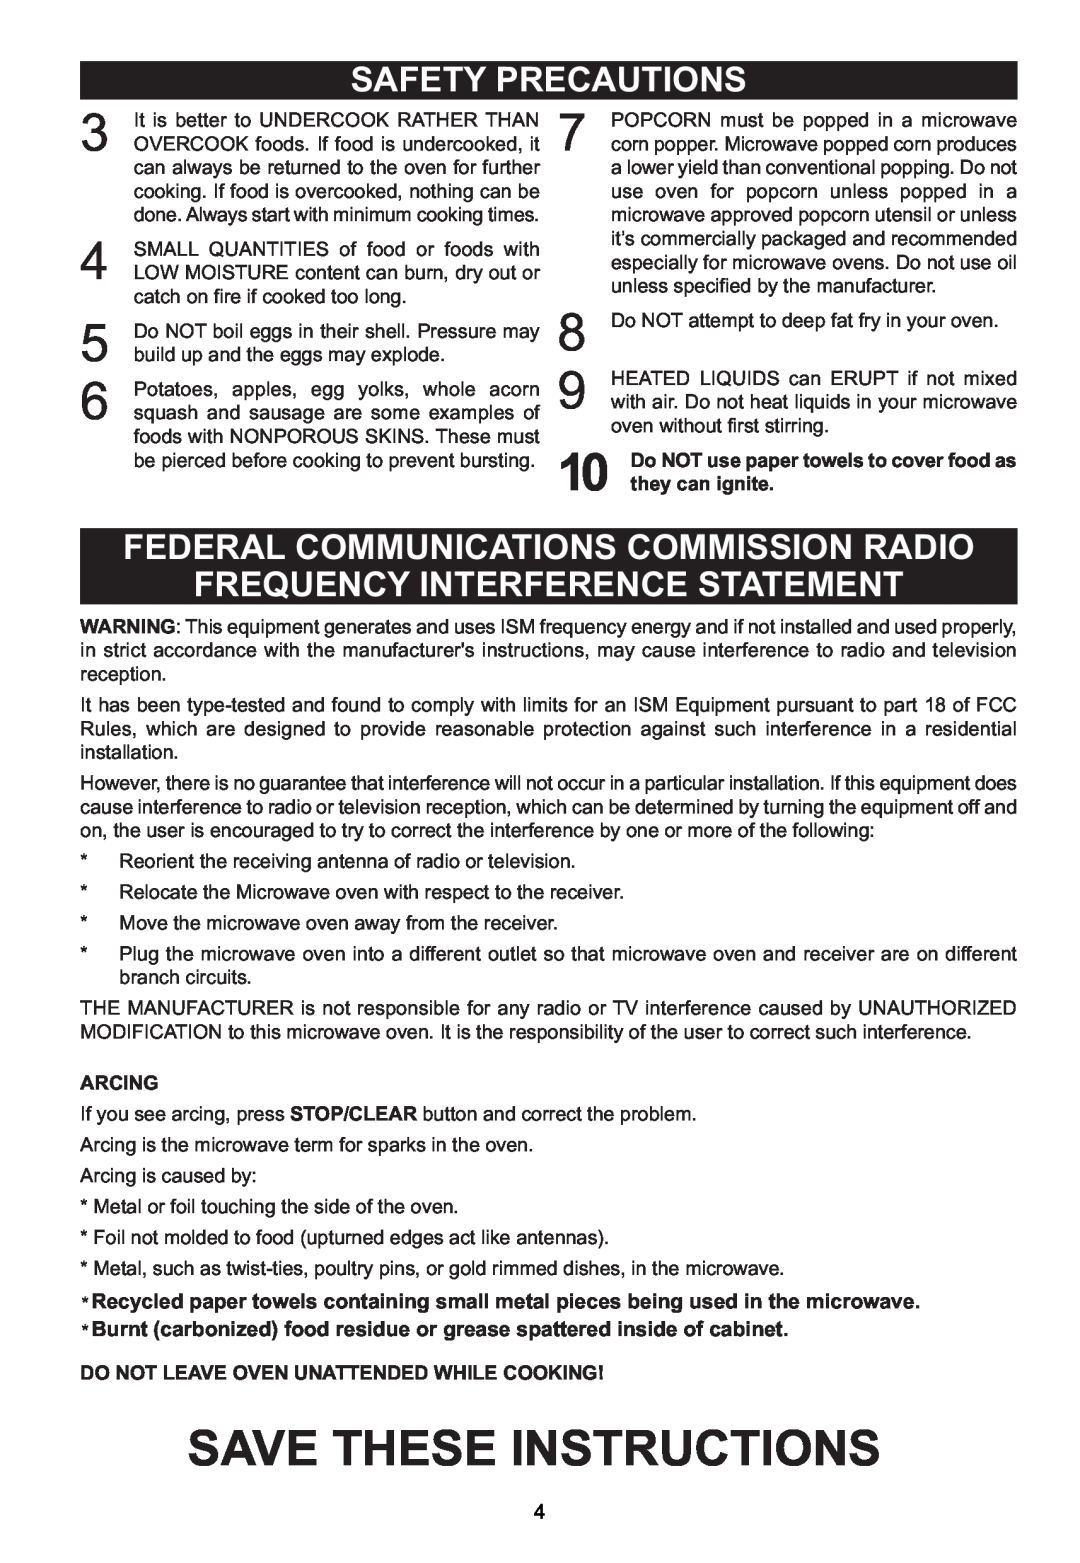 Emerson MW1161SB Safety Precautions, Federal Communications Commission Radio, Frequency Interference Statement, Arcing 